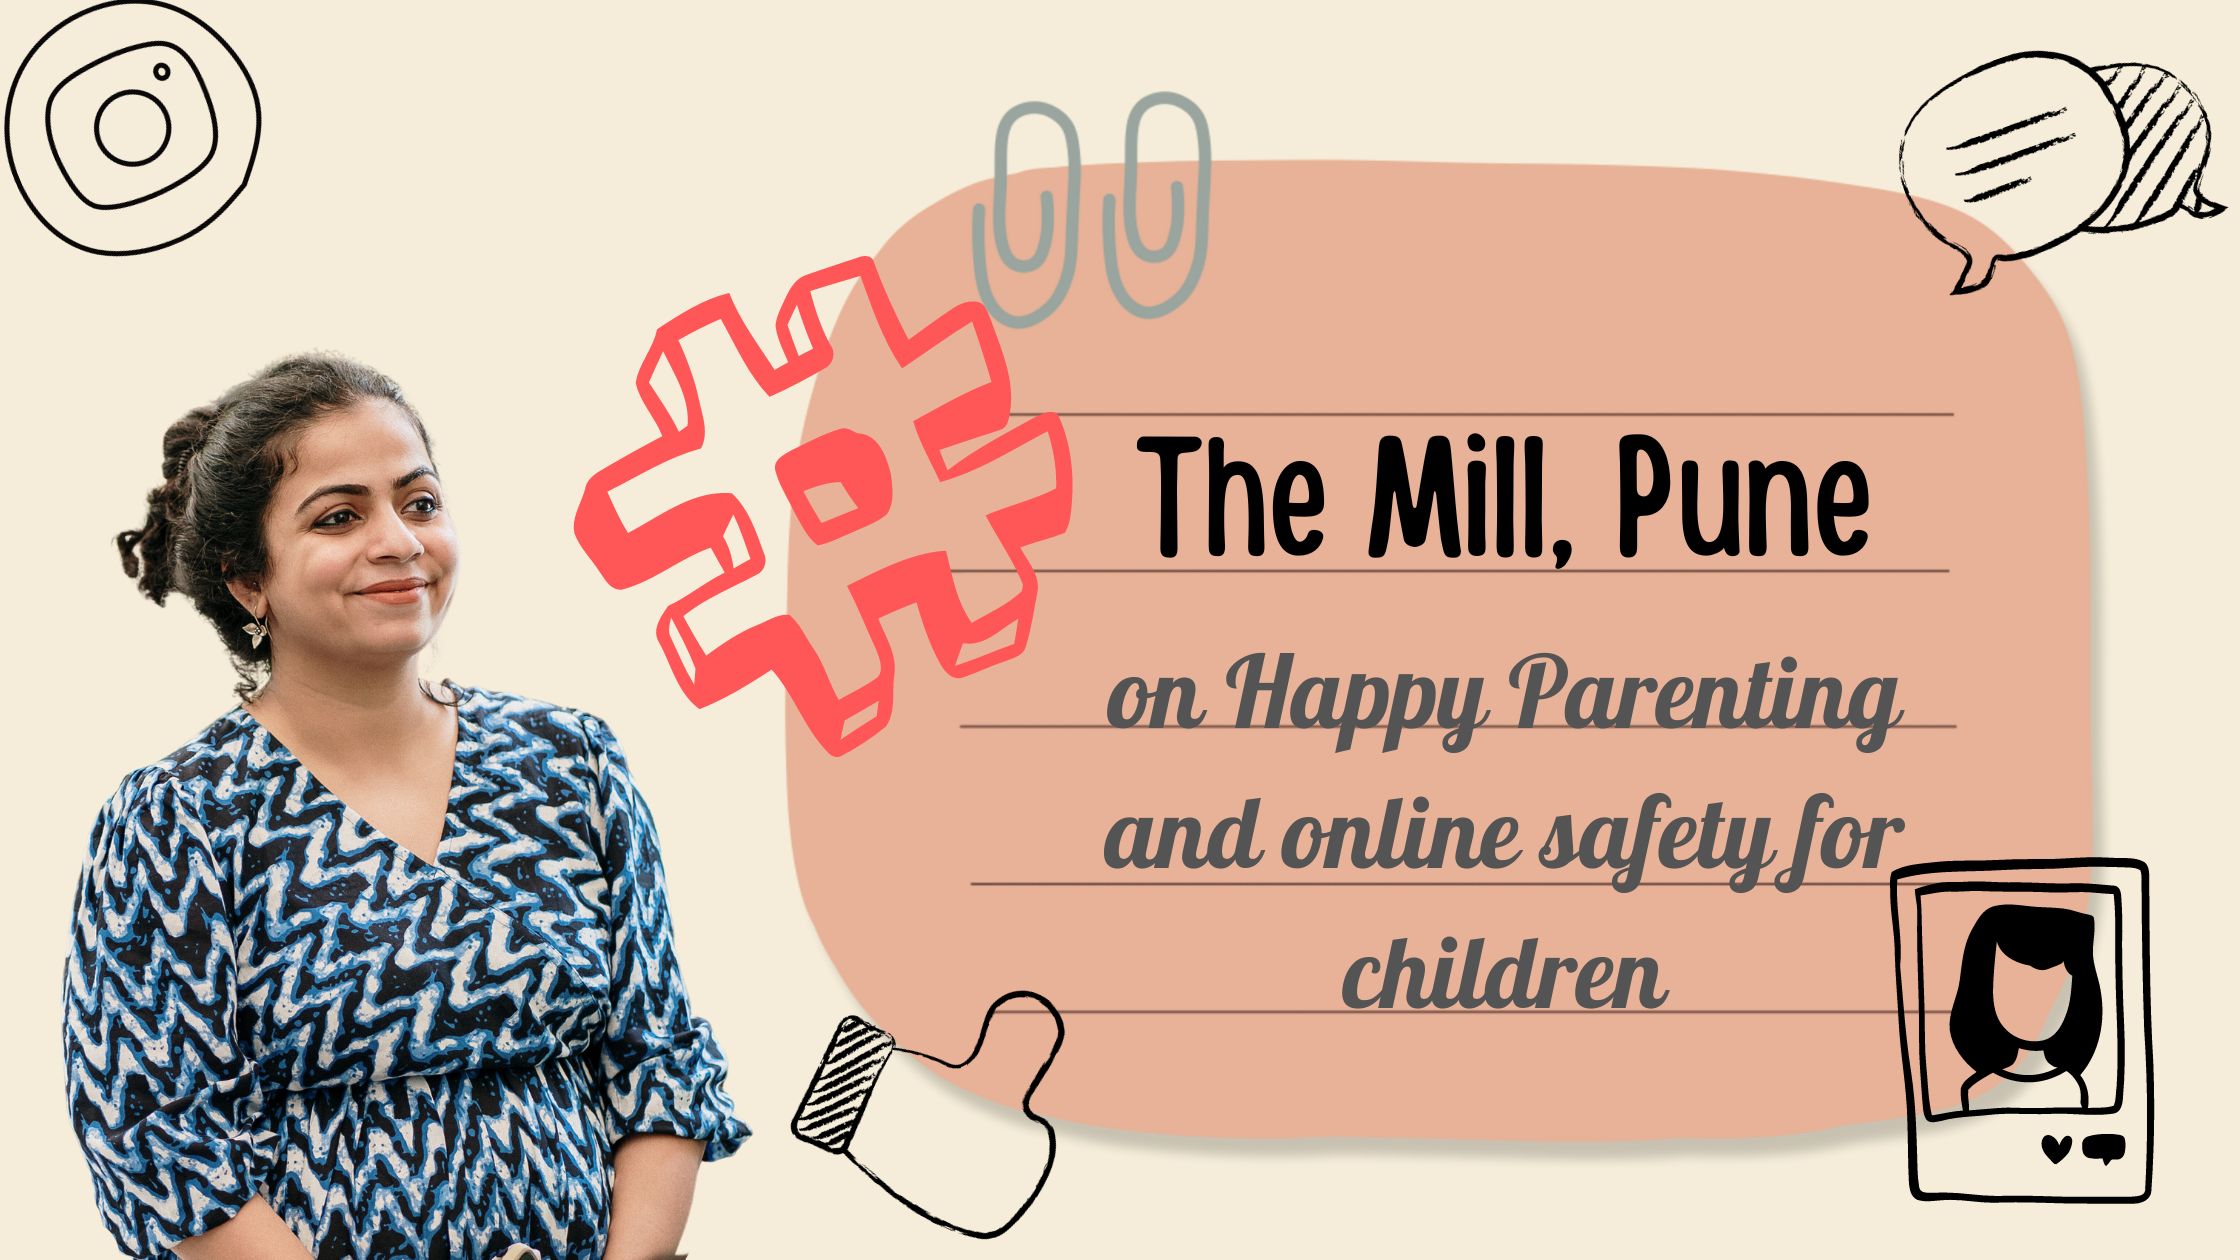 The Mill, Pune- on Happy Parenting and online safety for children